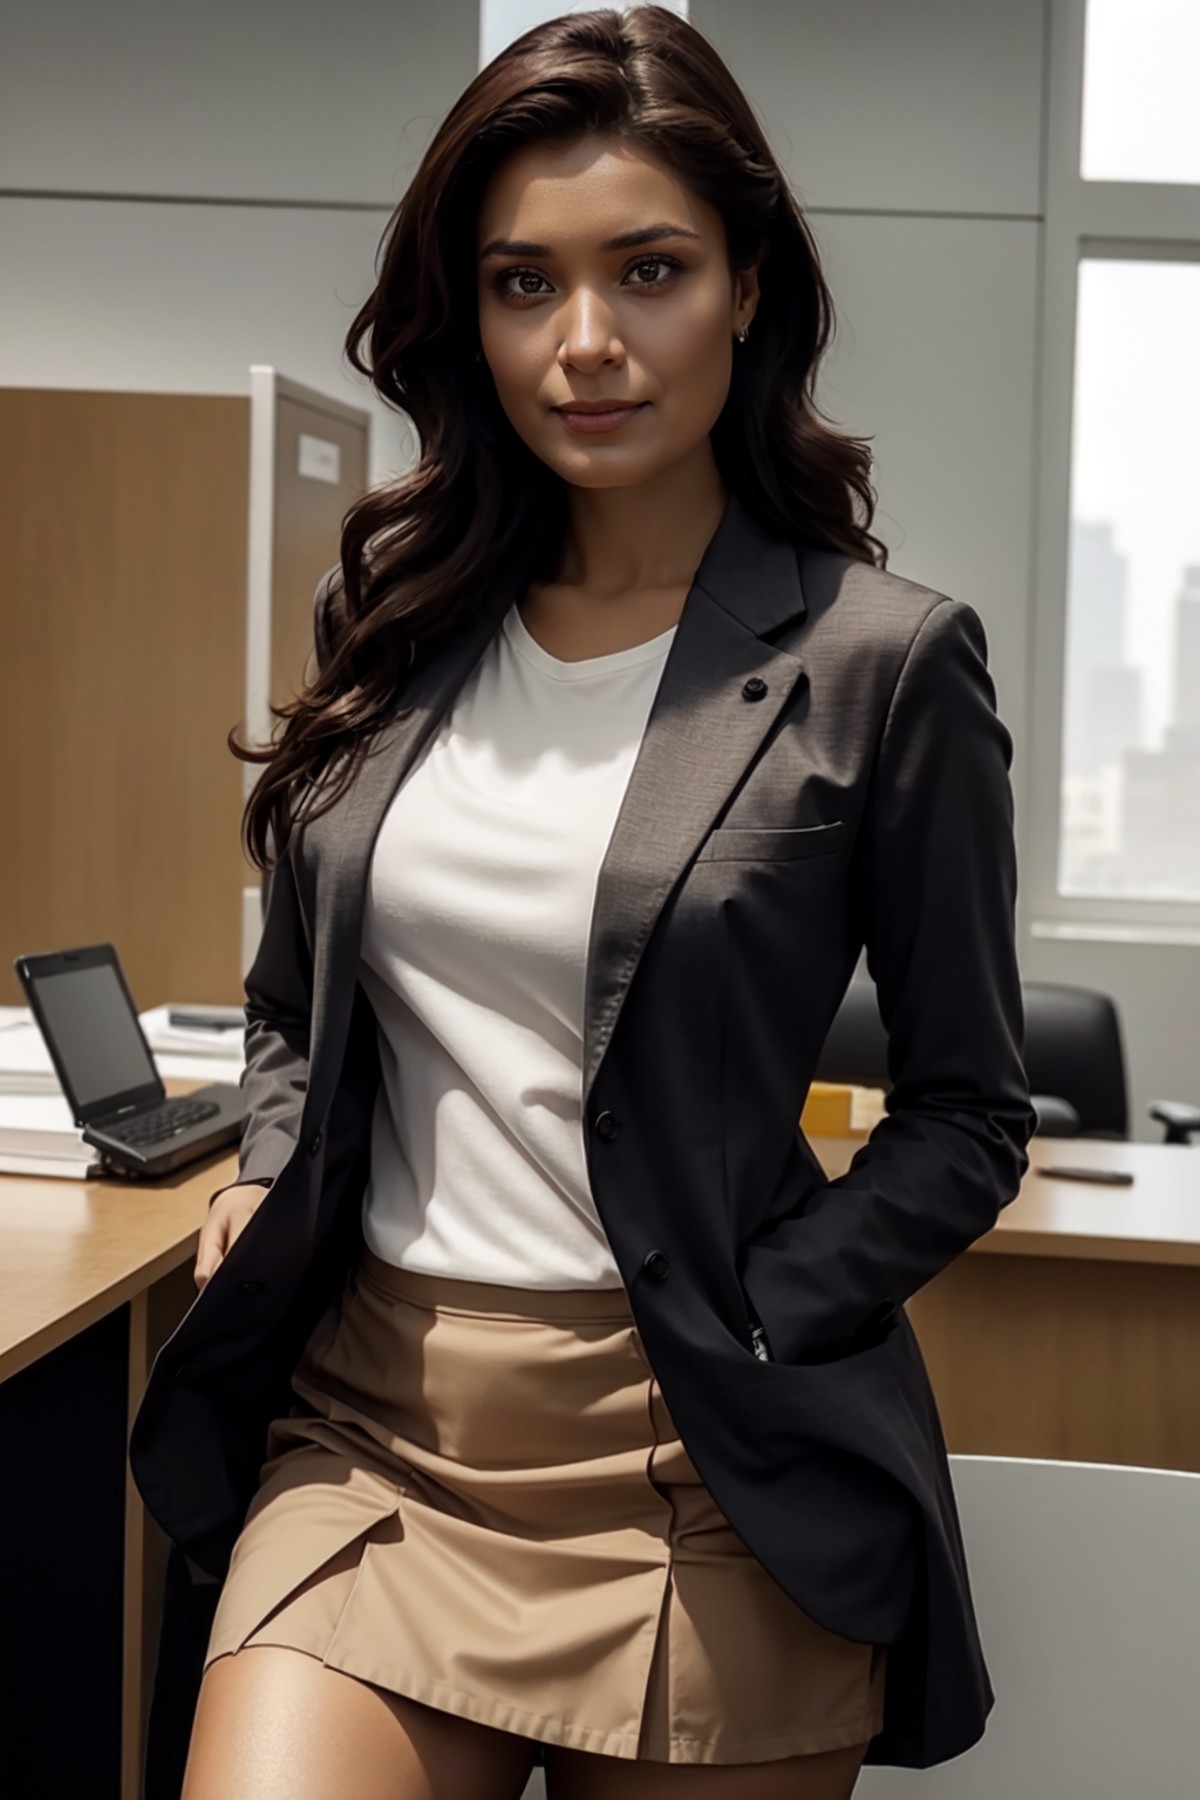 <lora:mondongo_LoRA_ShelleyConn_v2:1> mndngwmn, wearing a suit jacket with a shirt and a skirt, on an office,, (ultra real...